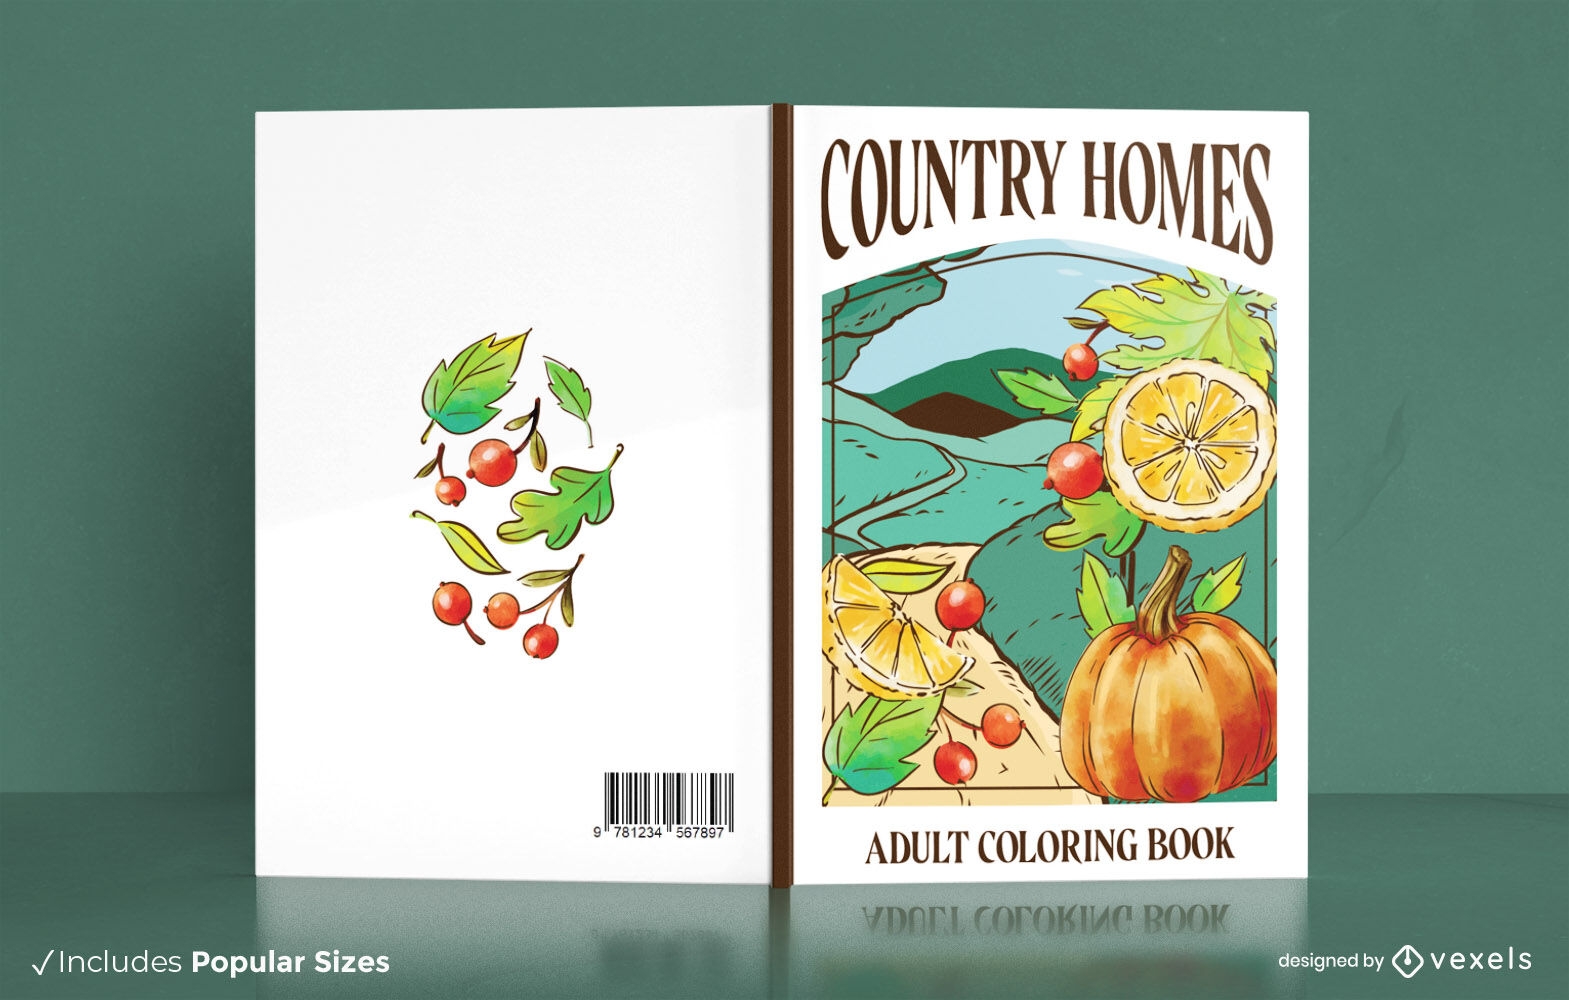 Country homes nature book cover design KDP